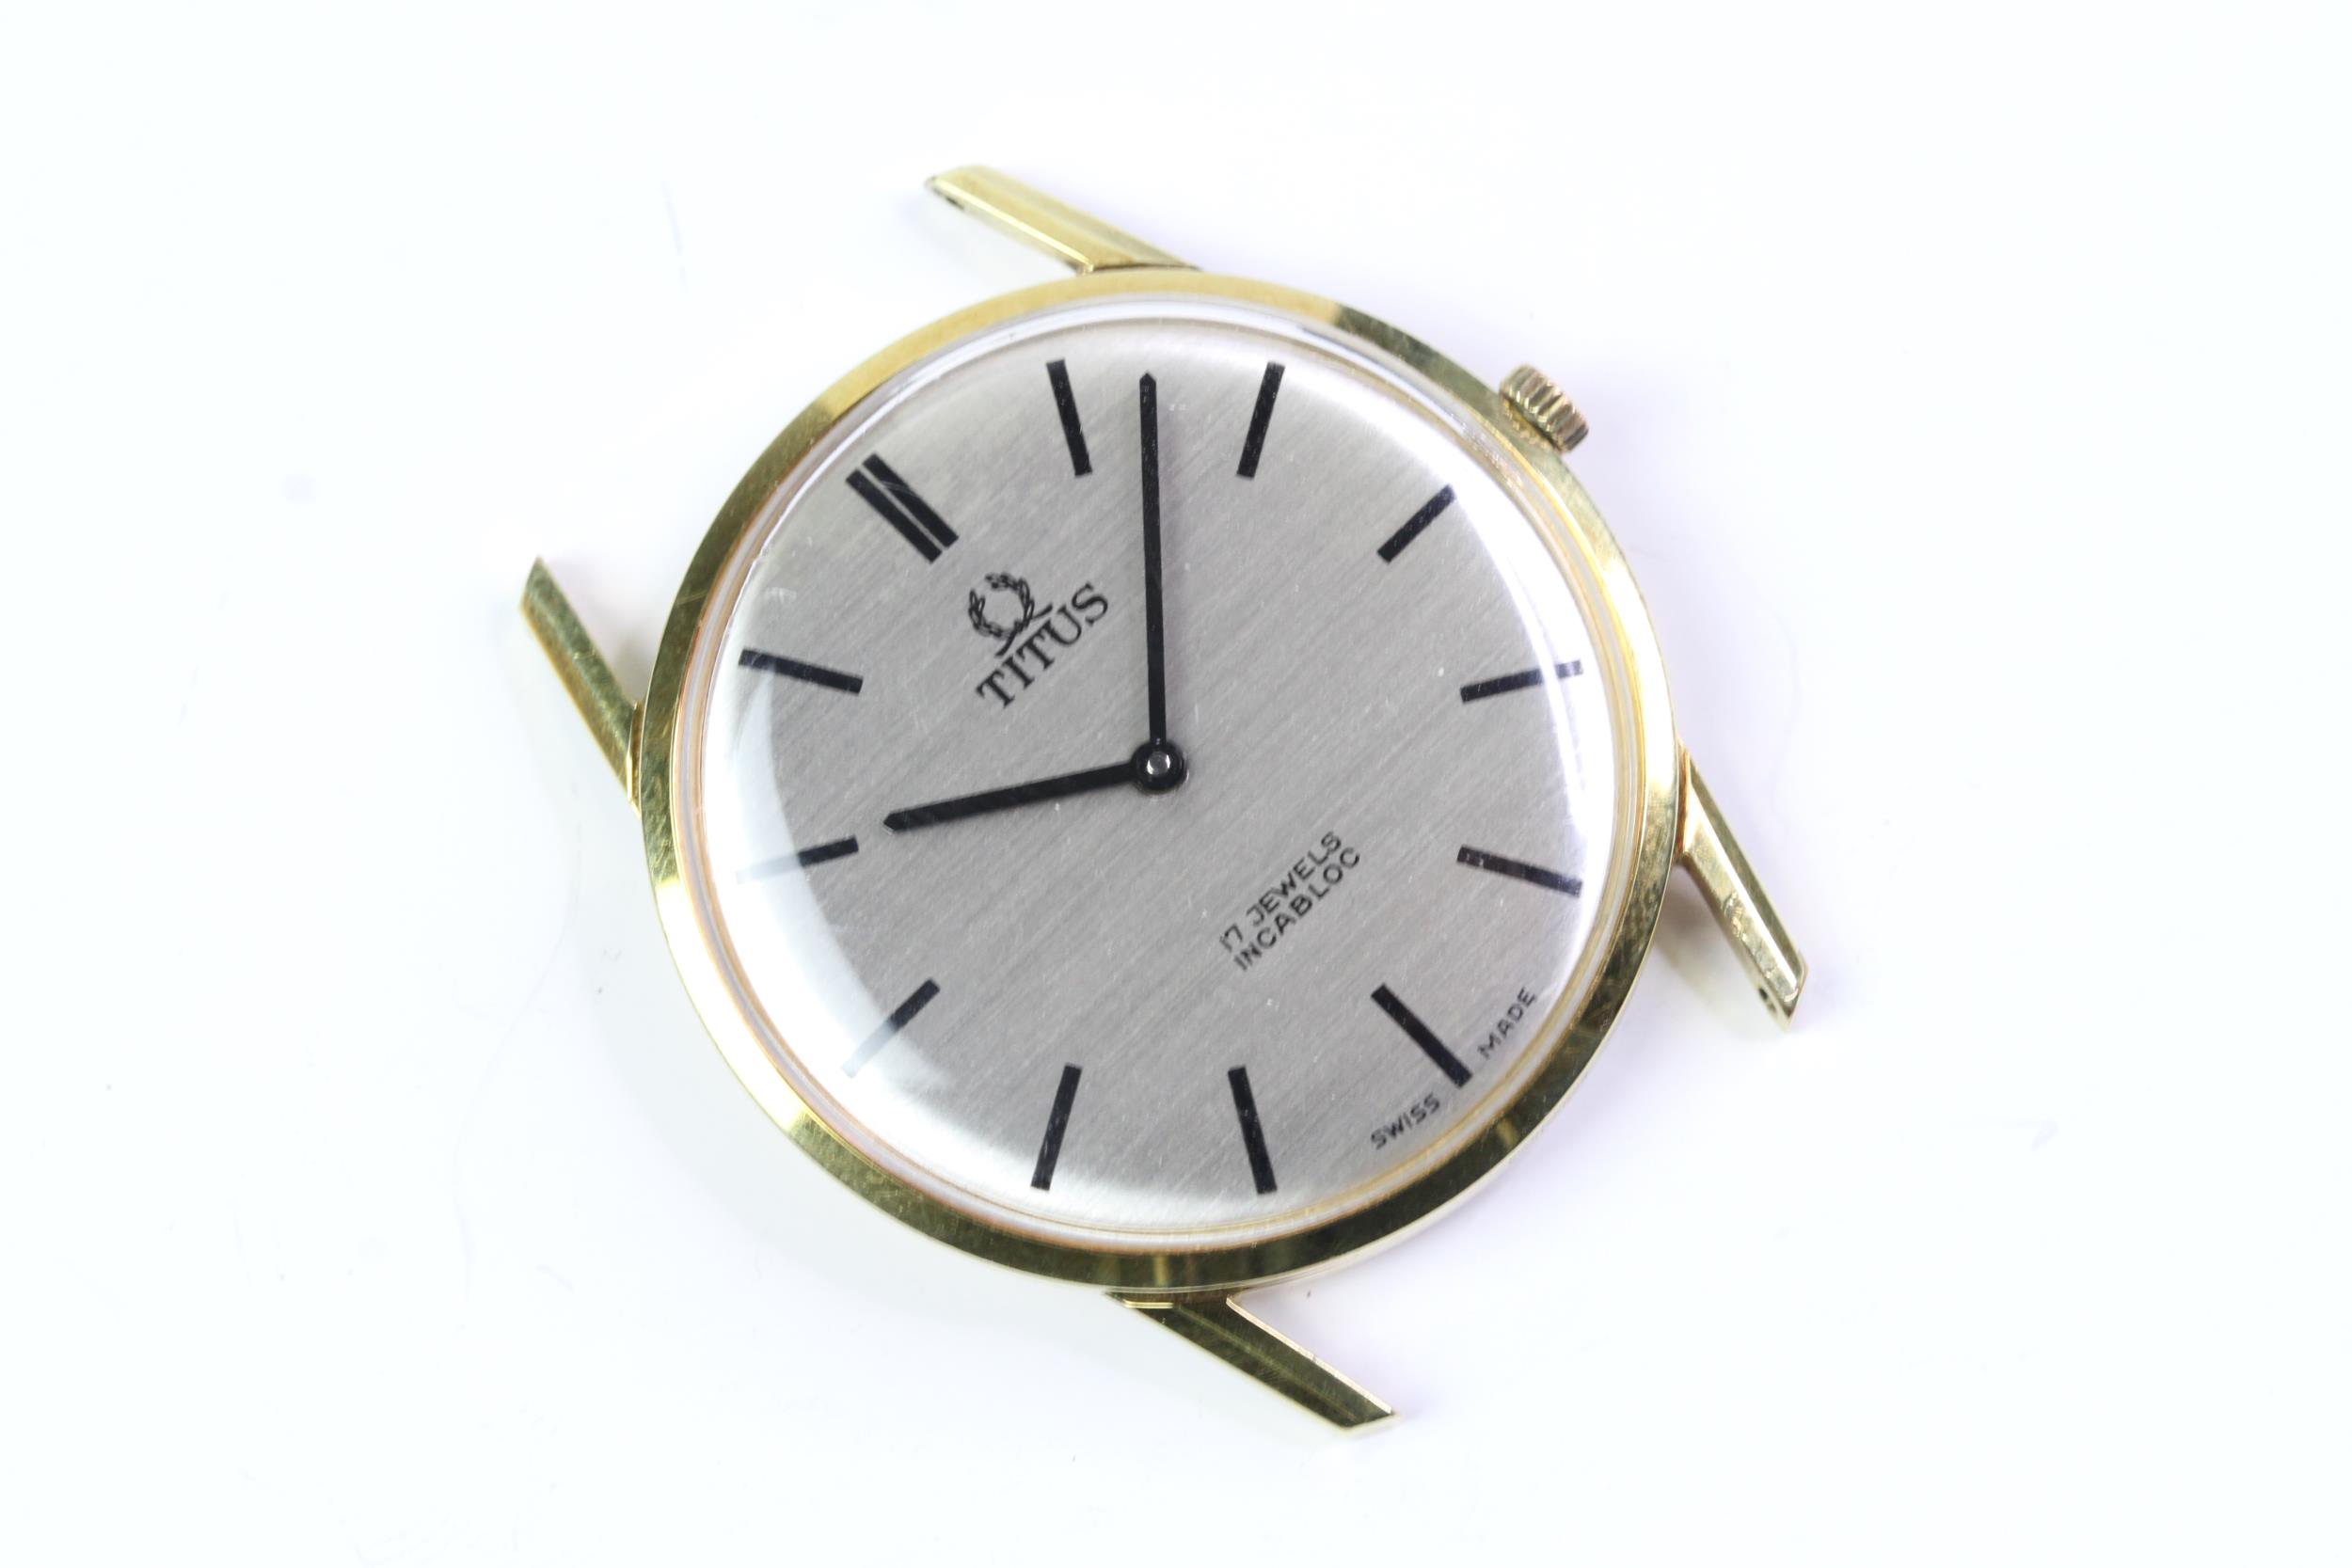 1960s Titus watch with grained dial, Gold plated stainless steel case 31mm with snap on case back,